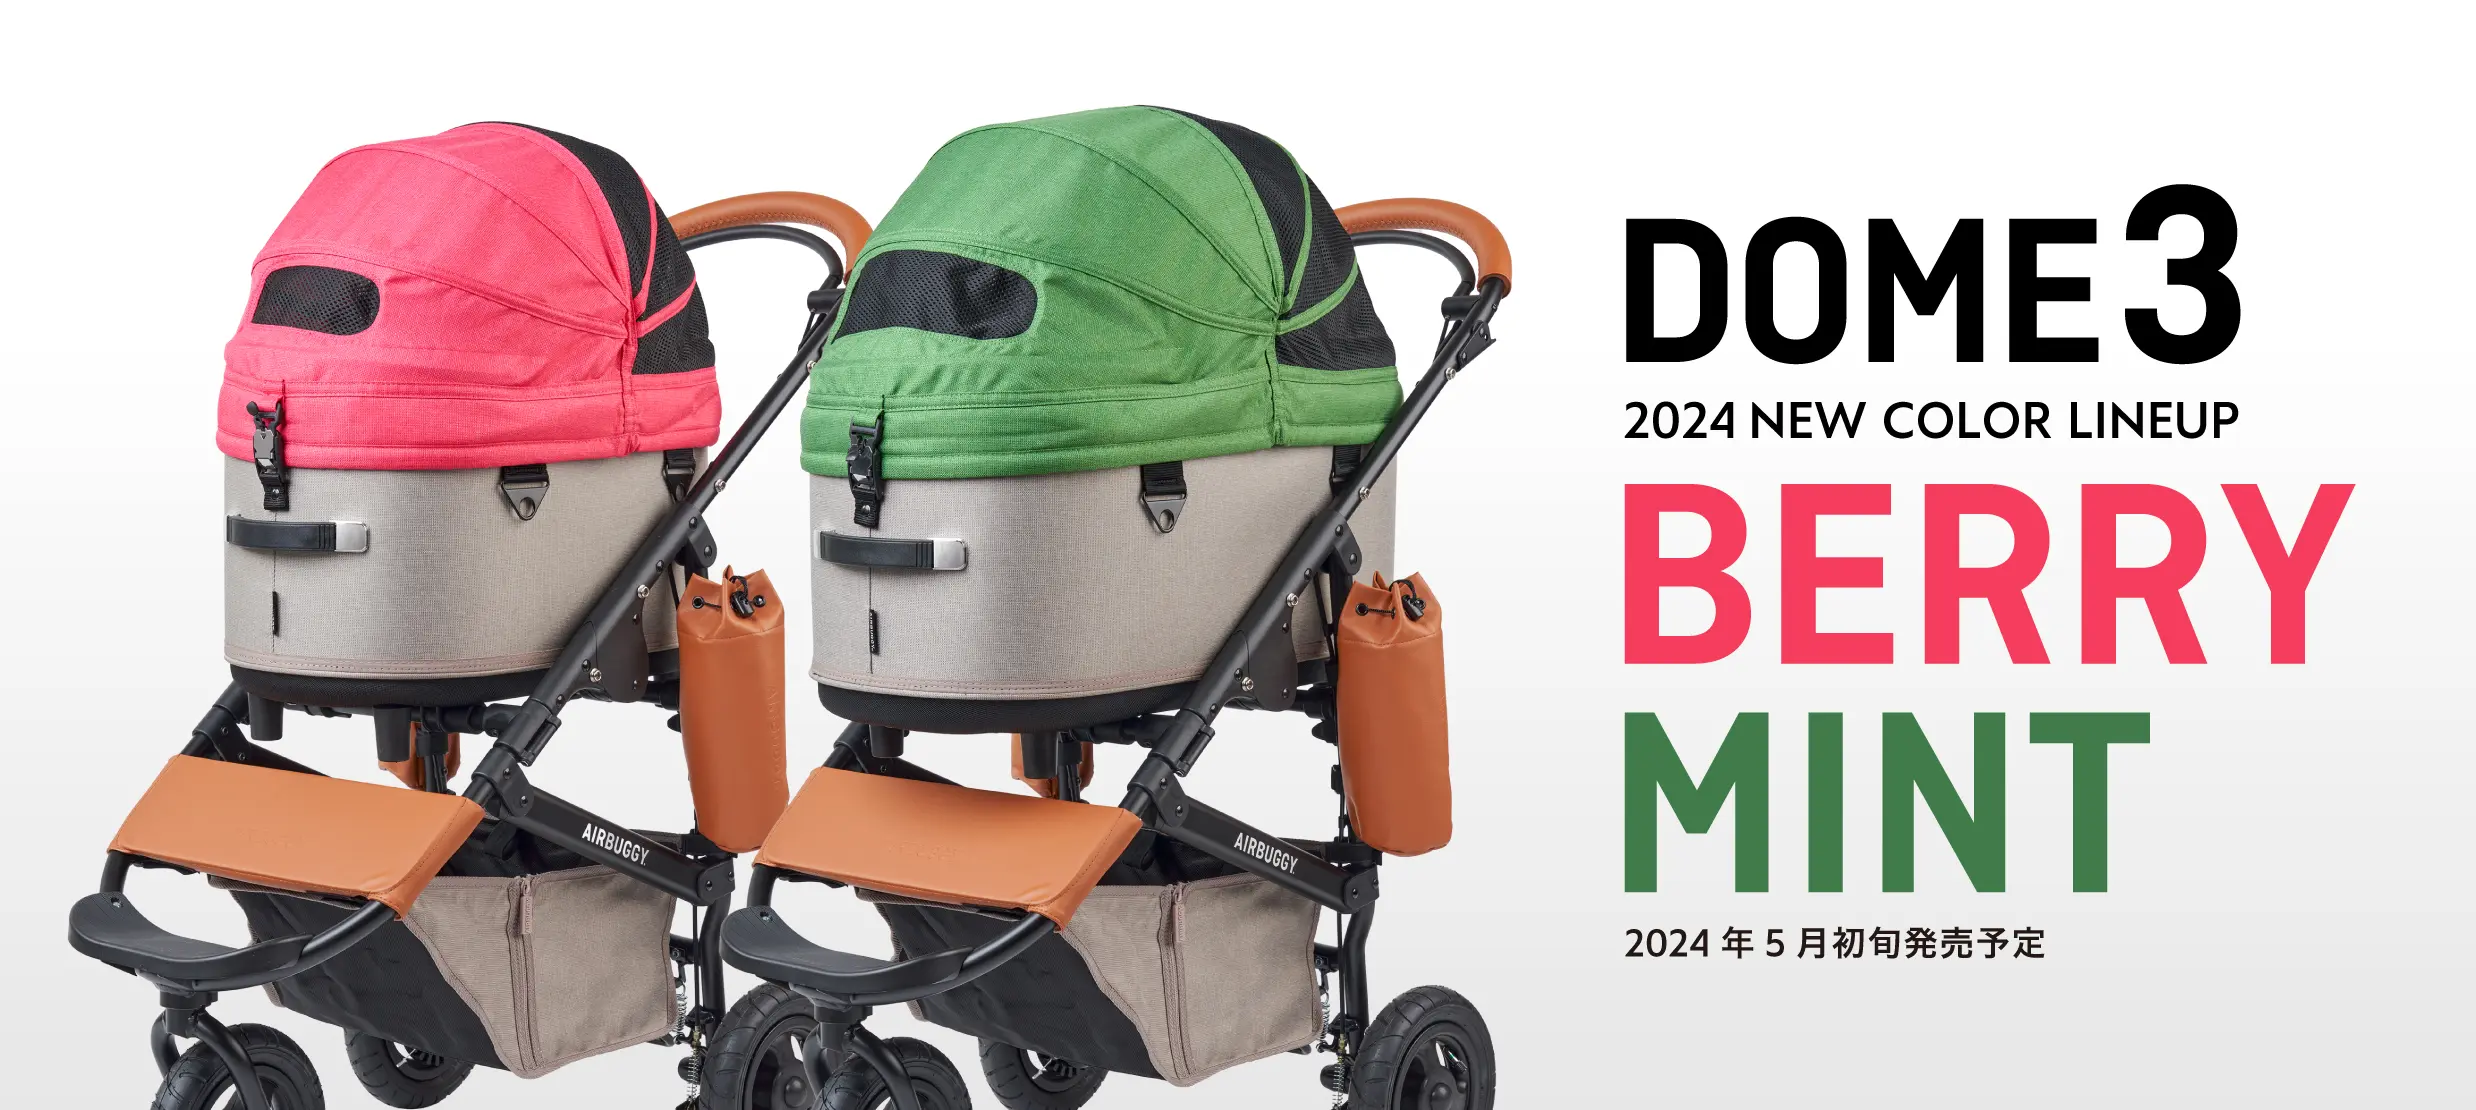 DOME3 2024 NEW COLOR | BERRY & MINT